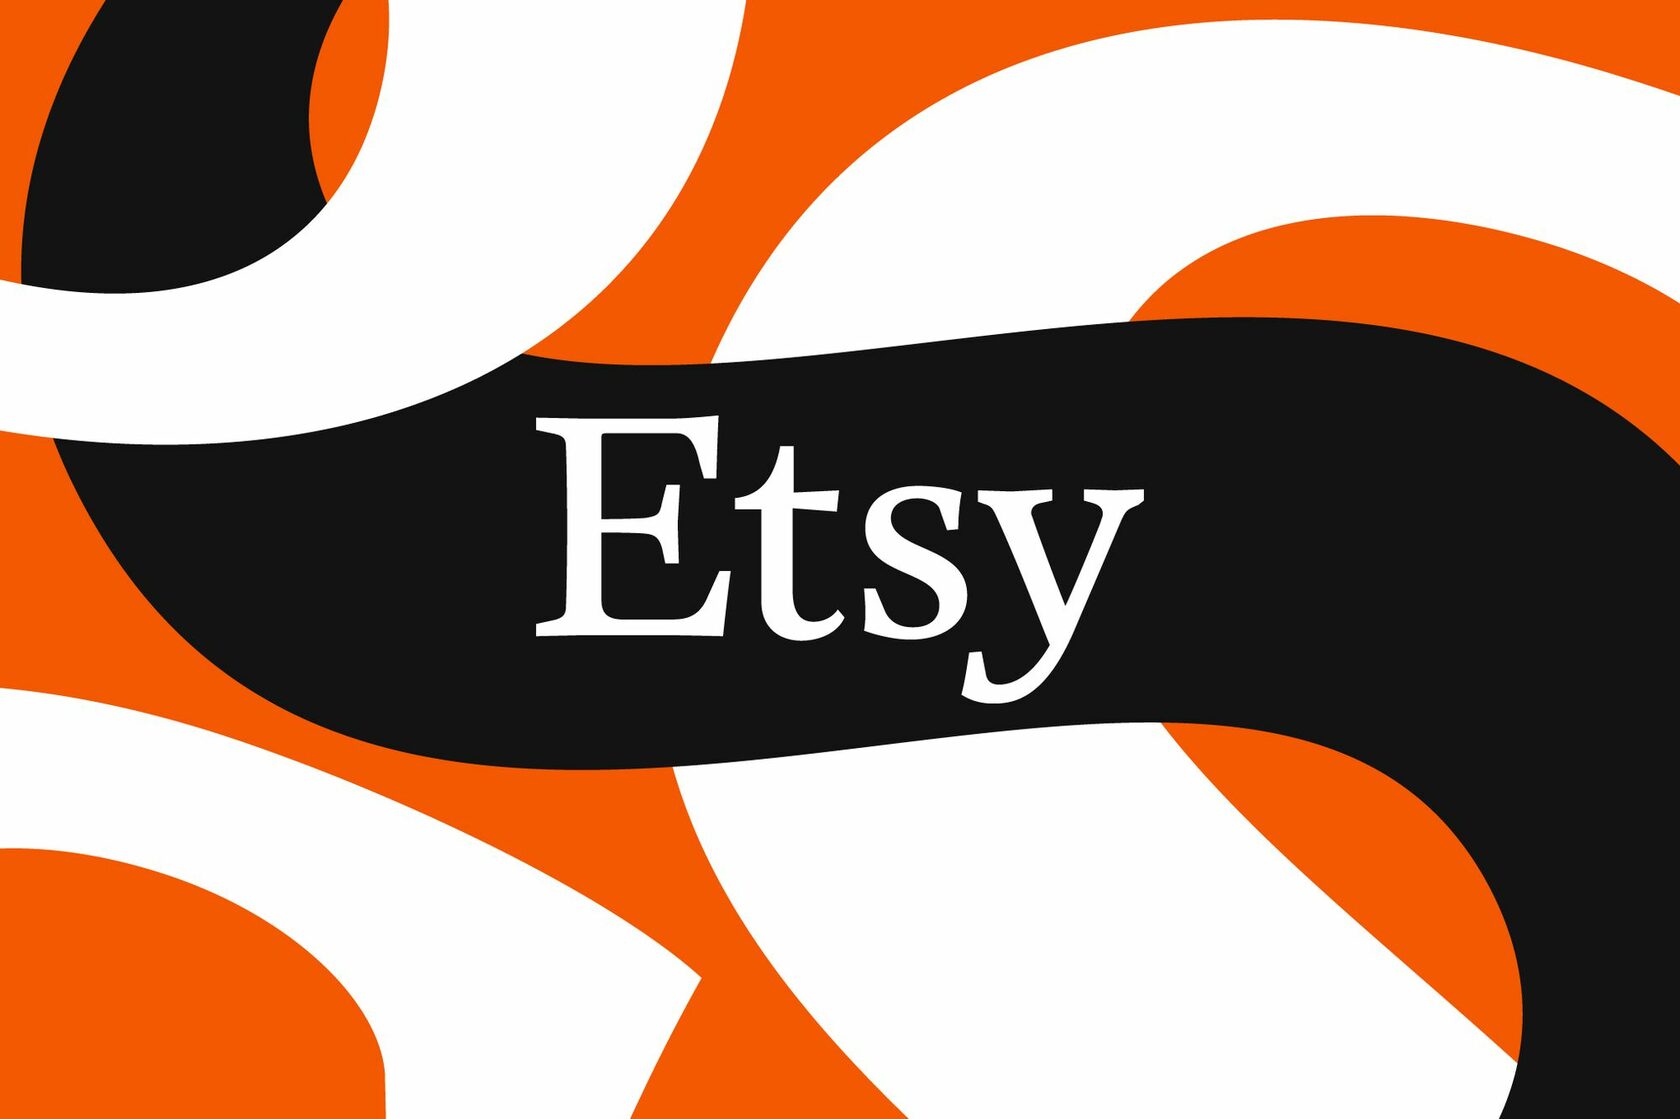 Etsy (ETSY) Stock: A Closer Look at an E-Commerce Gem